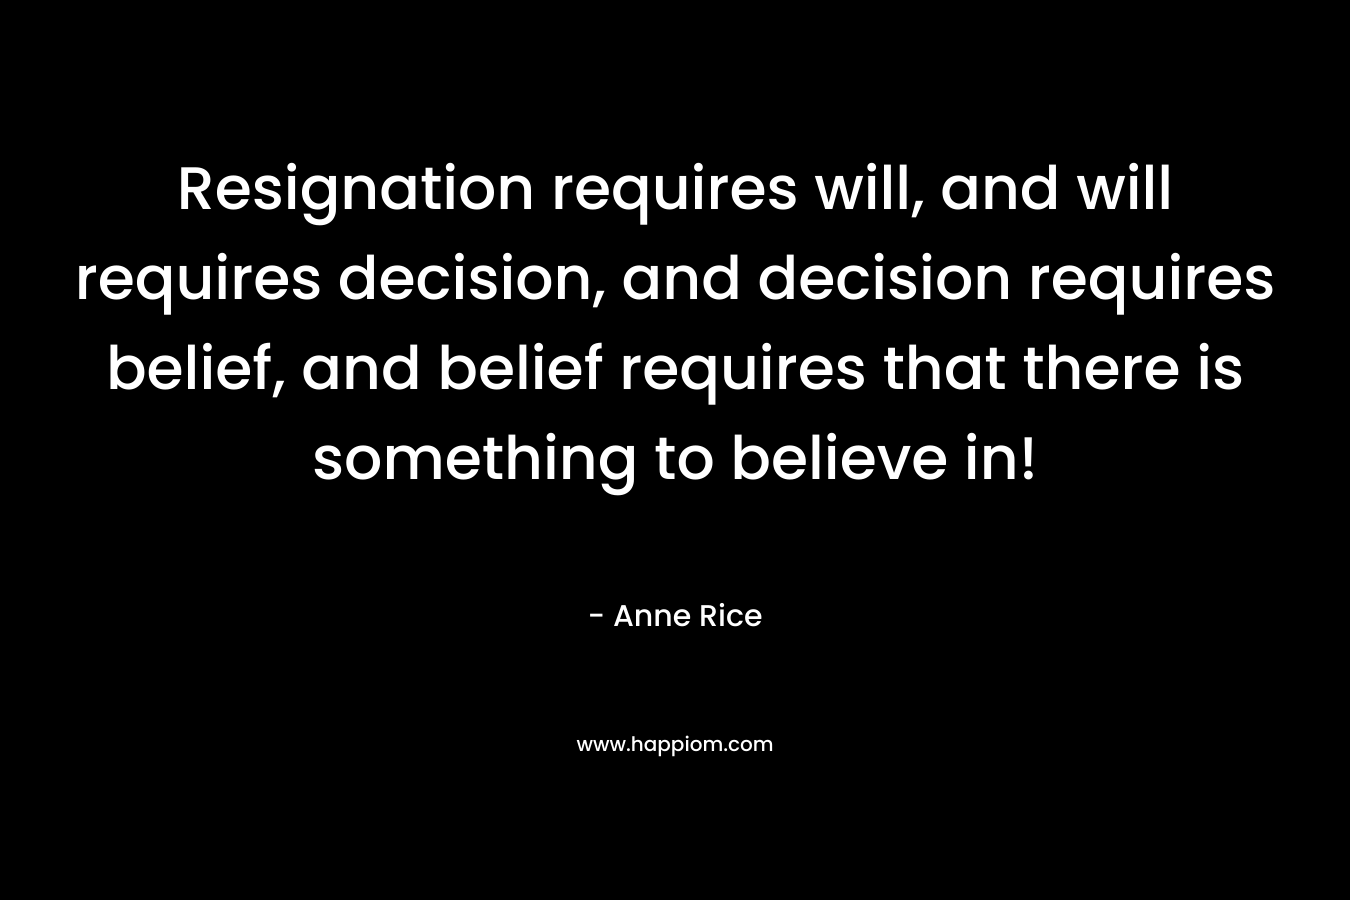 Resignation requires will, and will requires decision, and decision requires belief, and belief requires that there is something to believe in! – Anne Rice